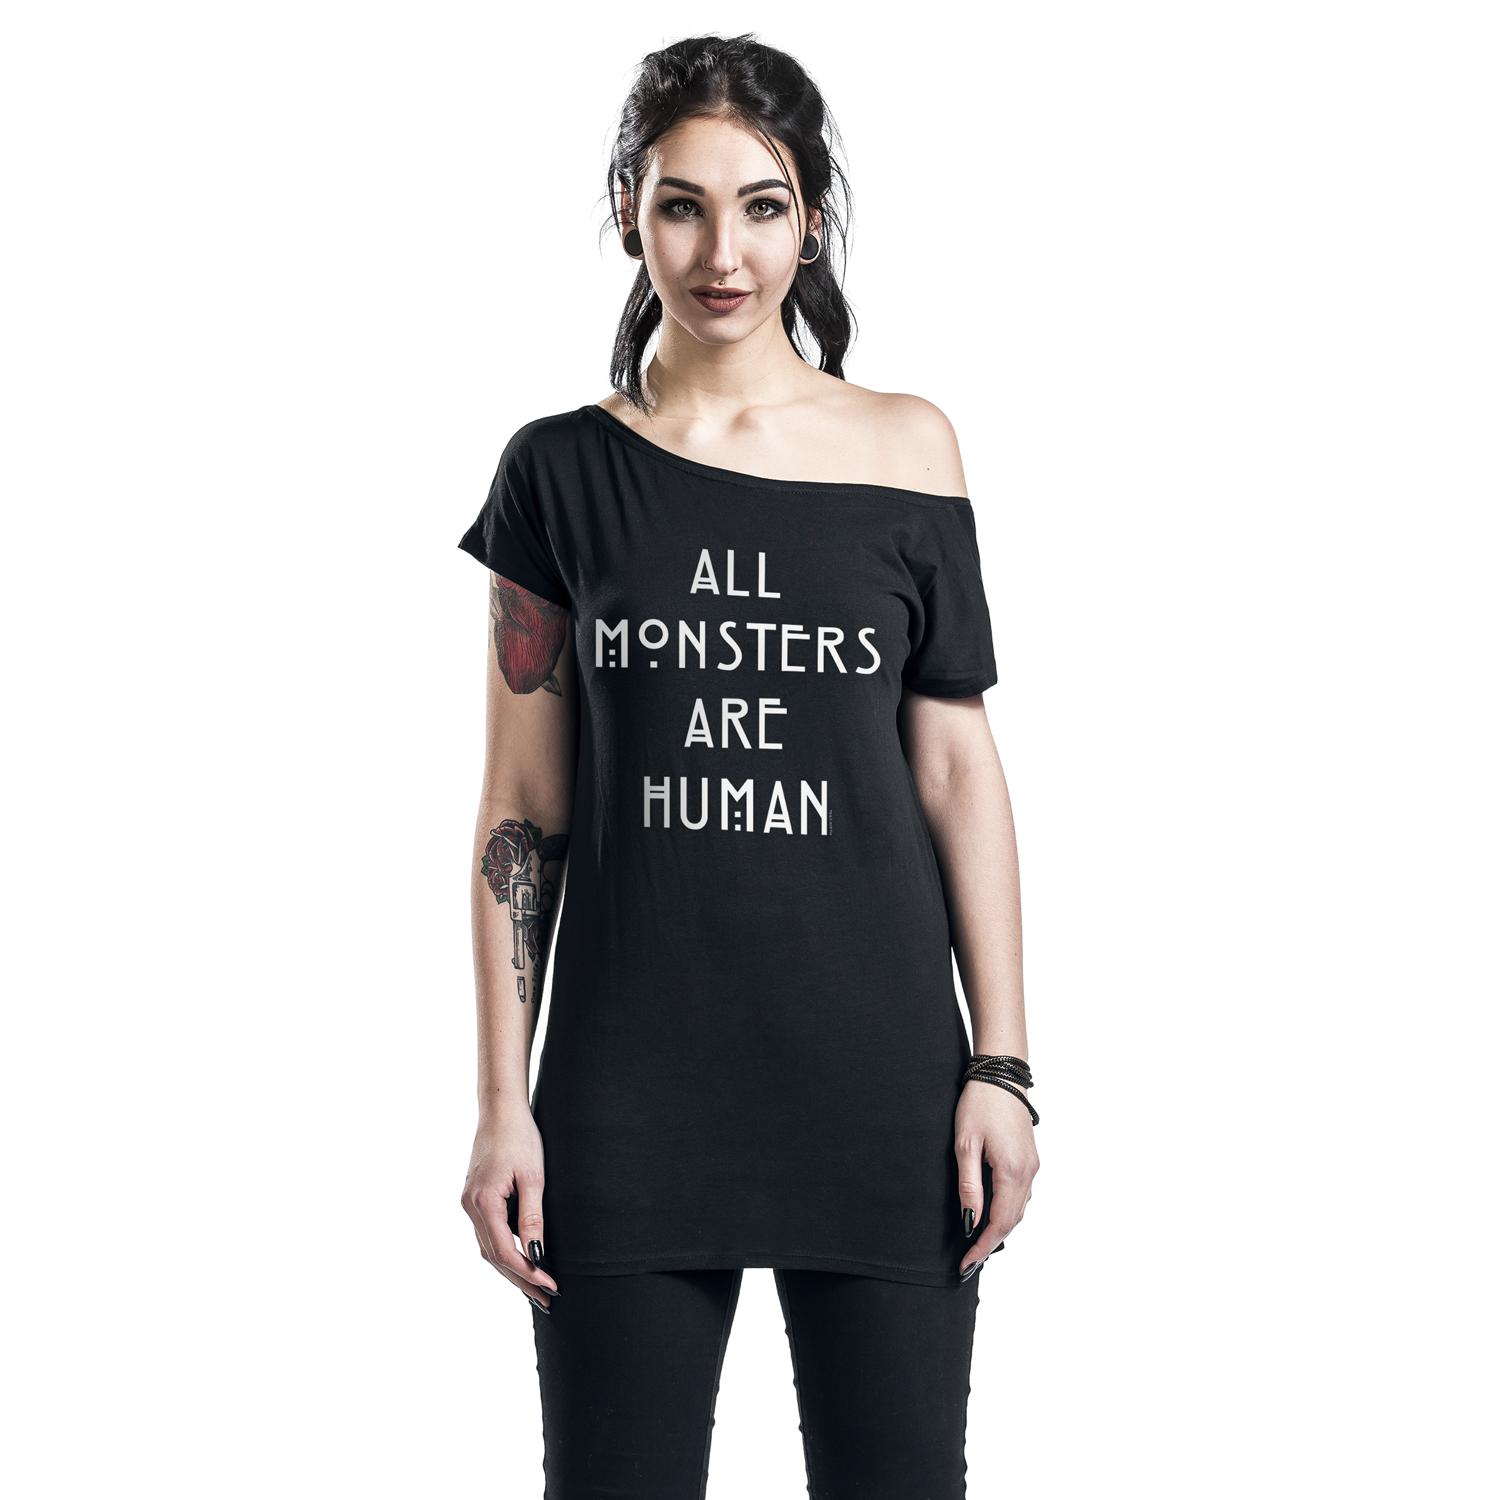 All Monsters Are Human T-shirt Design woman